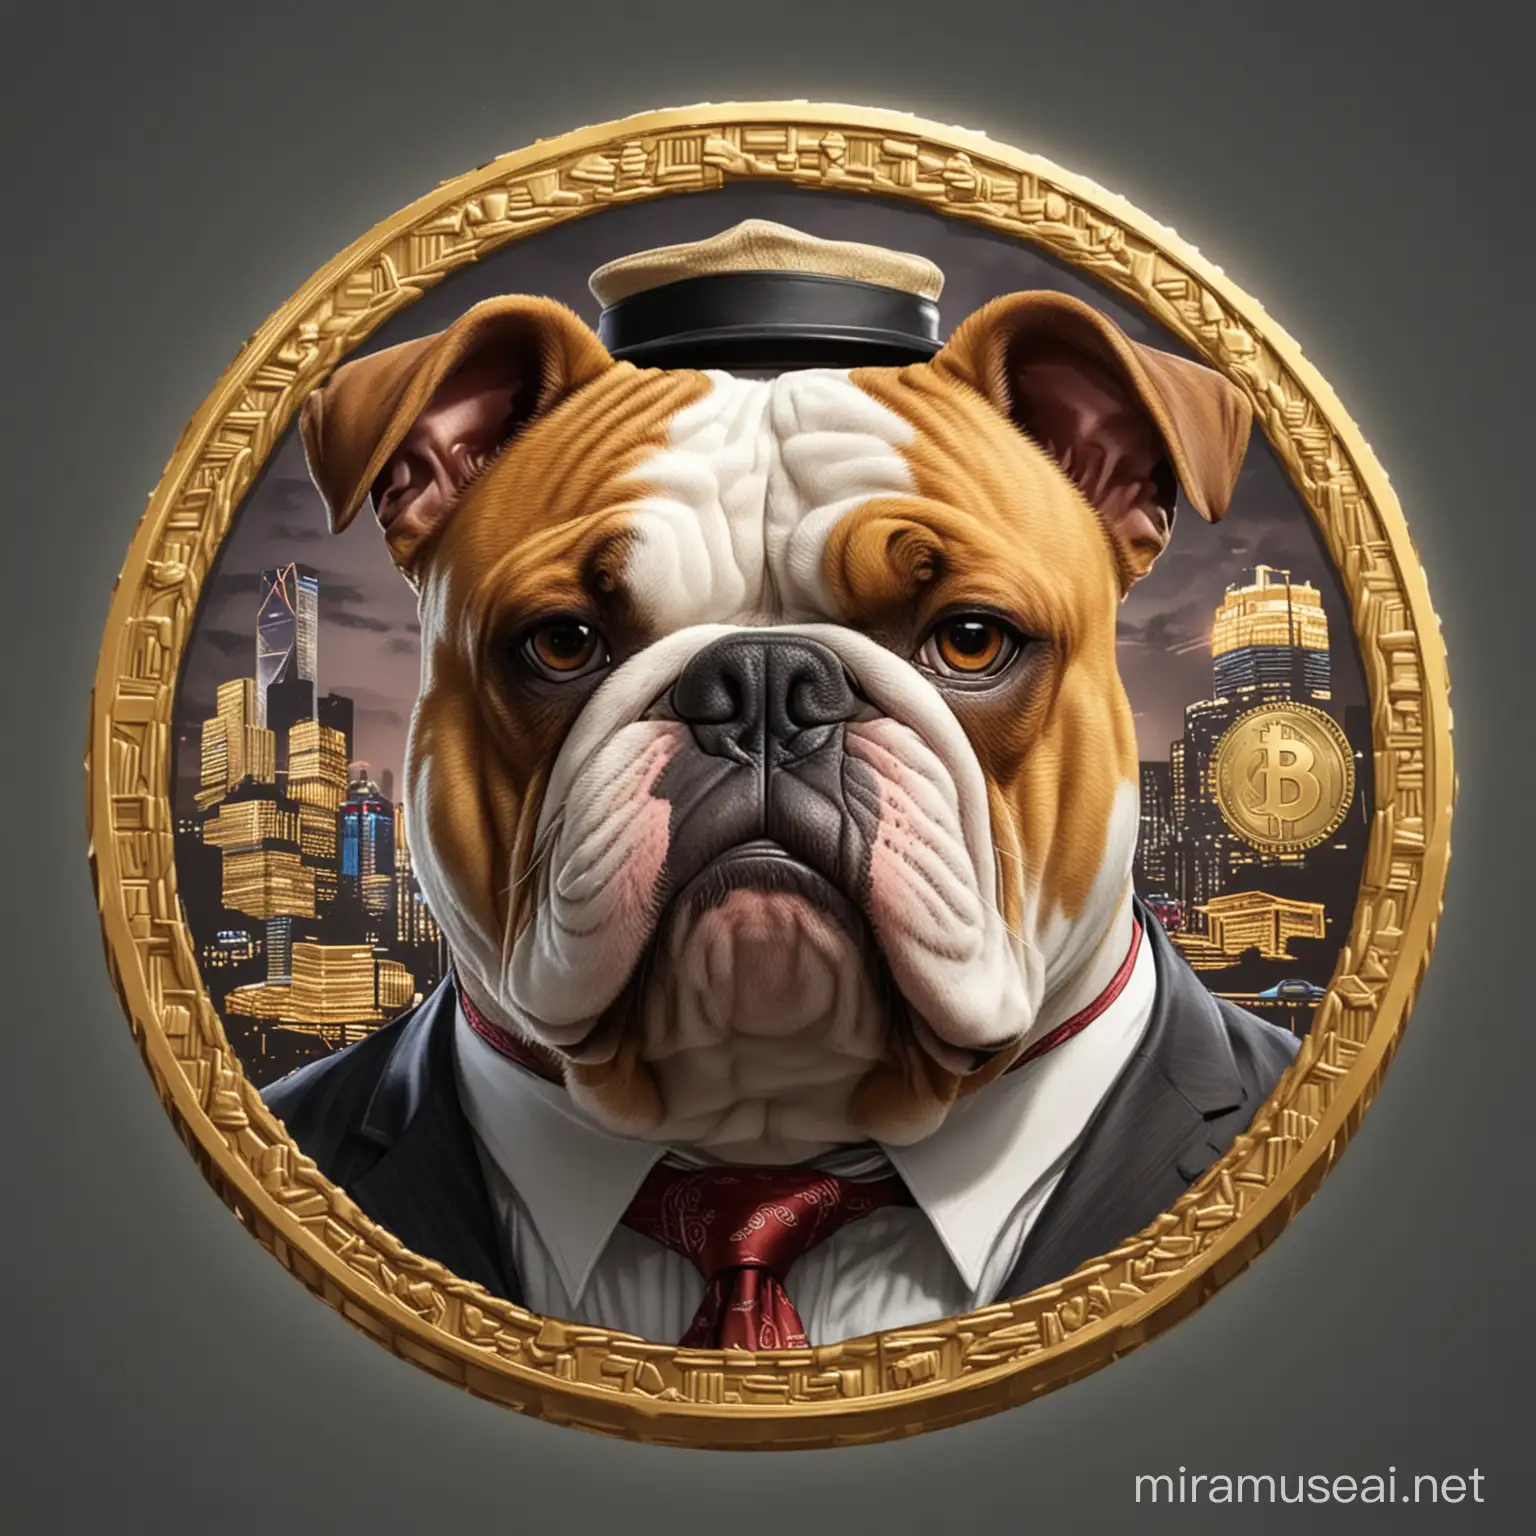 create a detailed coin with the face of an gta style gangster bulldog  , so i can use it as a profile picture for a crypto coin